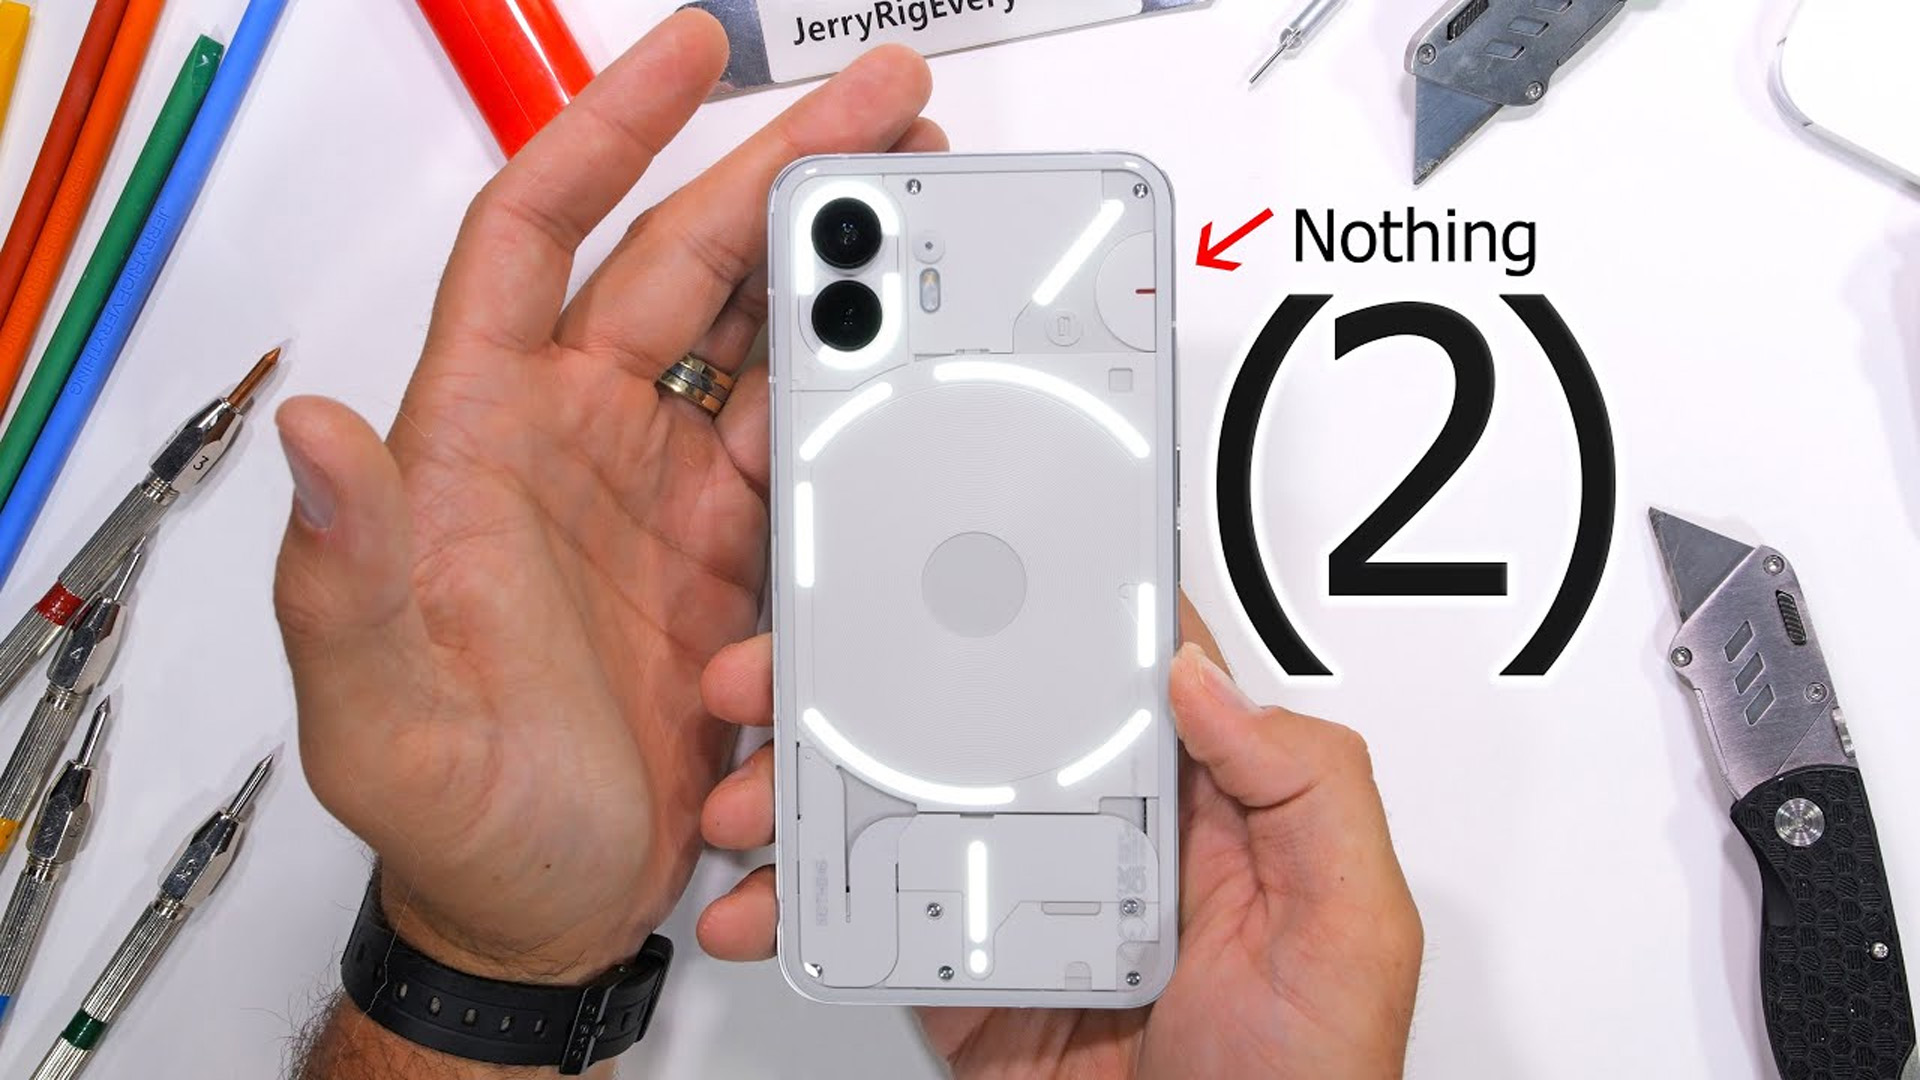 Nothing phone 2a 4pda. Смартфон. Смартфон nothing. Nothing Phone 2. Смартфон nothing Phone.